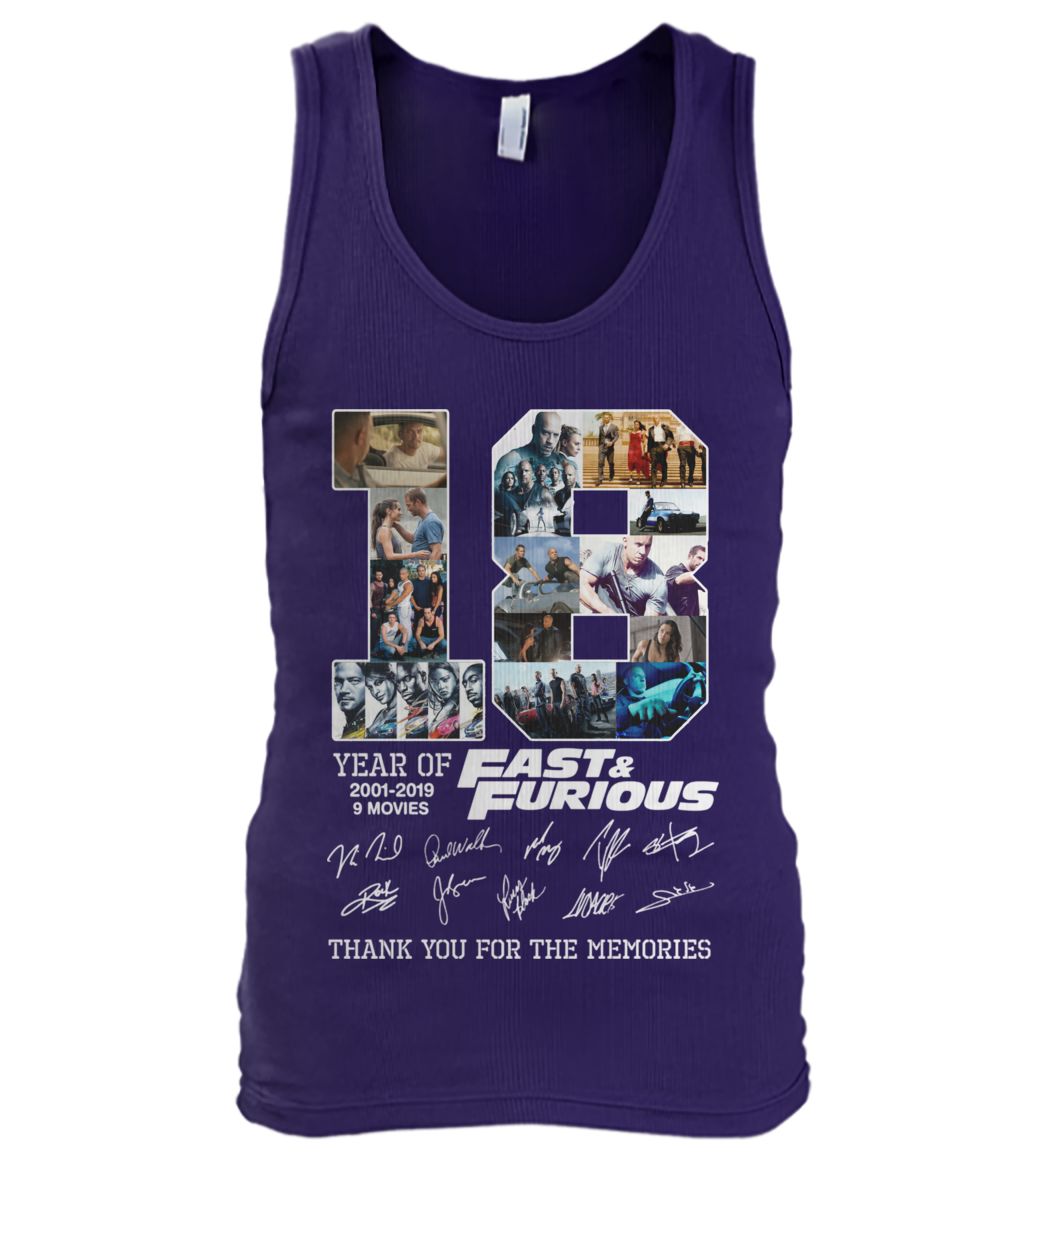 18 years of fast and furious 2001 2019 9 films signatures men's tank top